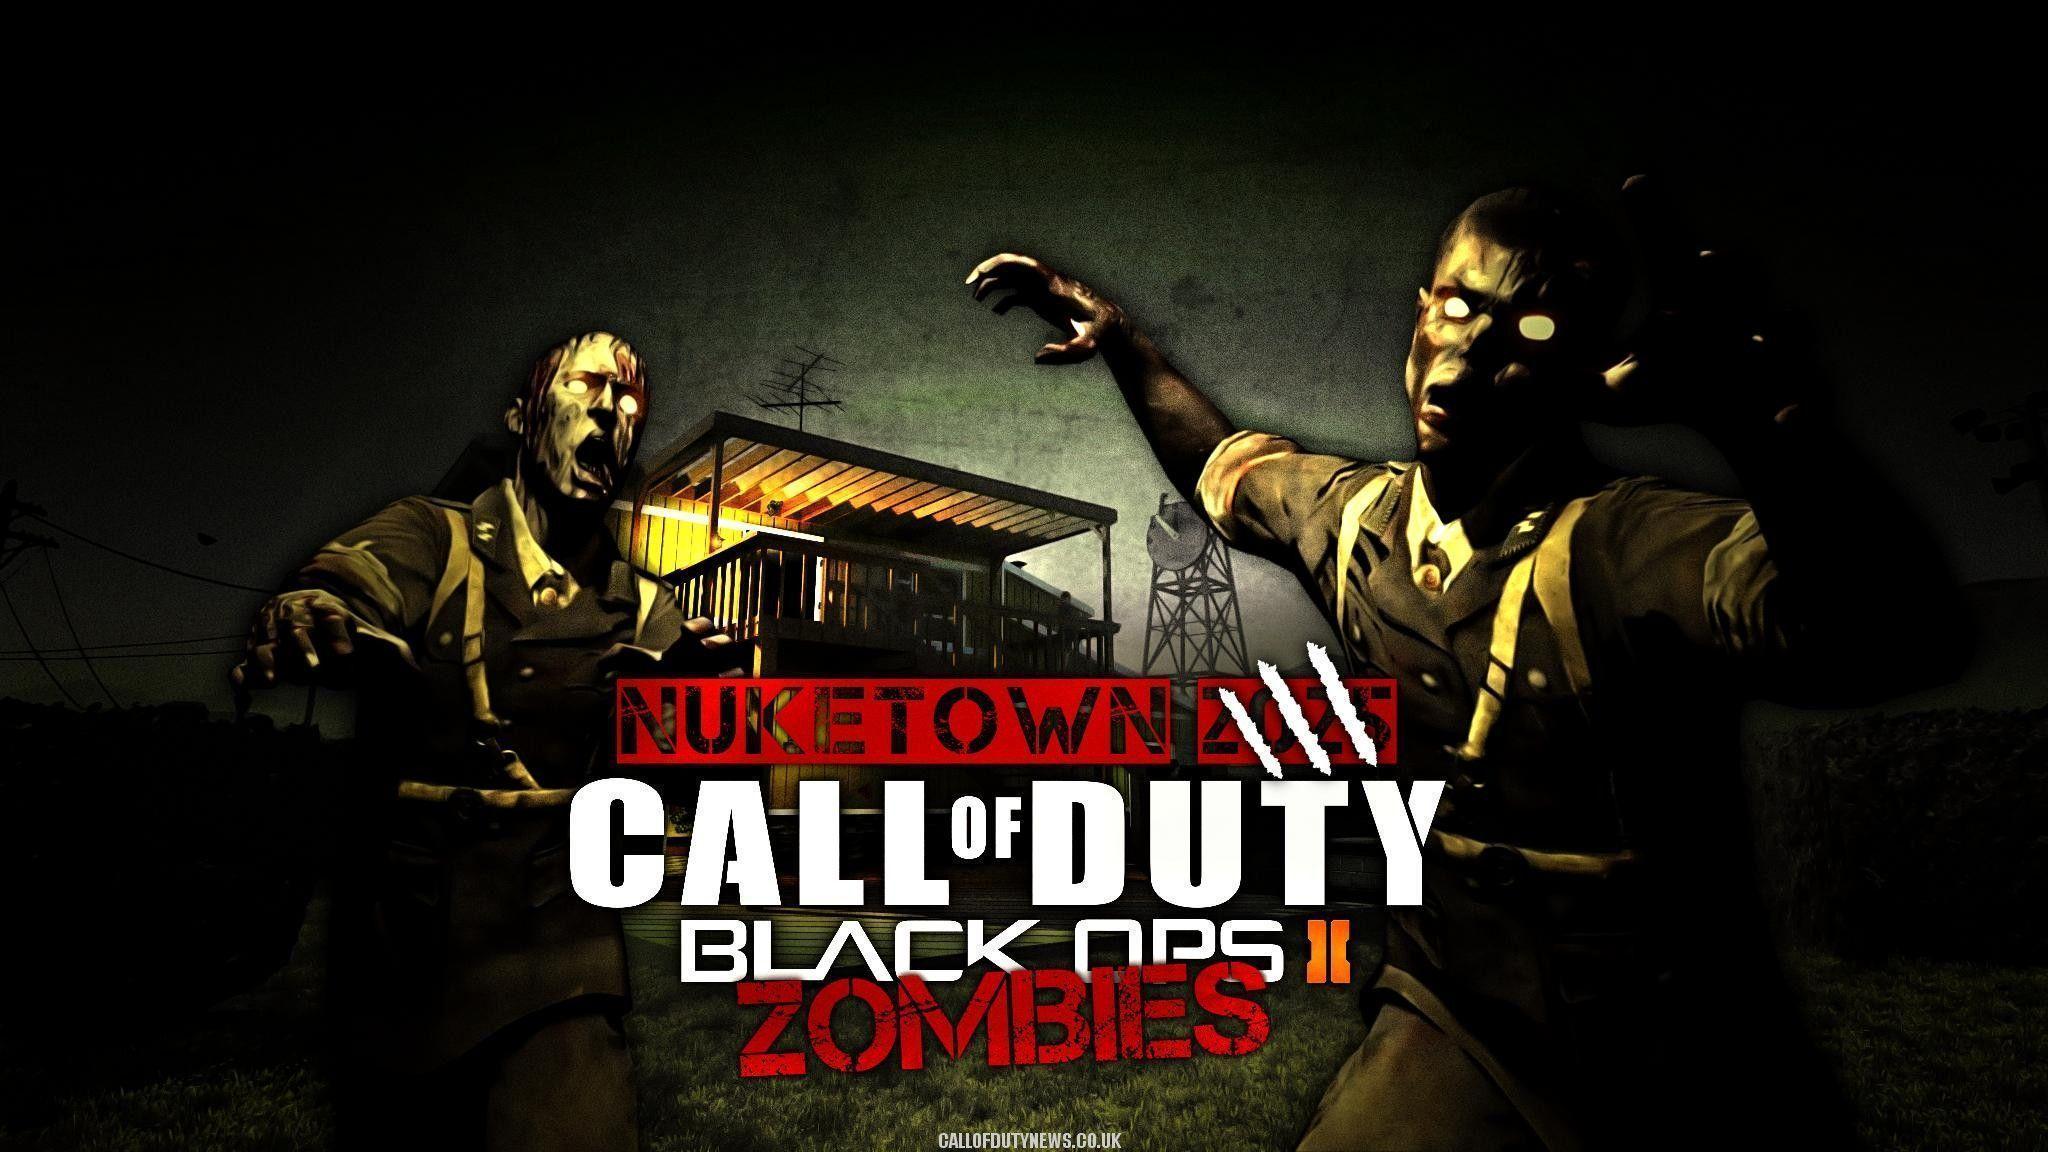 Call of Duty Black Ops 2 Zombie Exclusive HD Wallpaper #